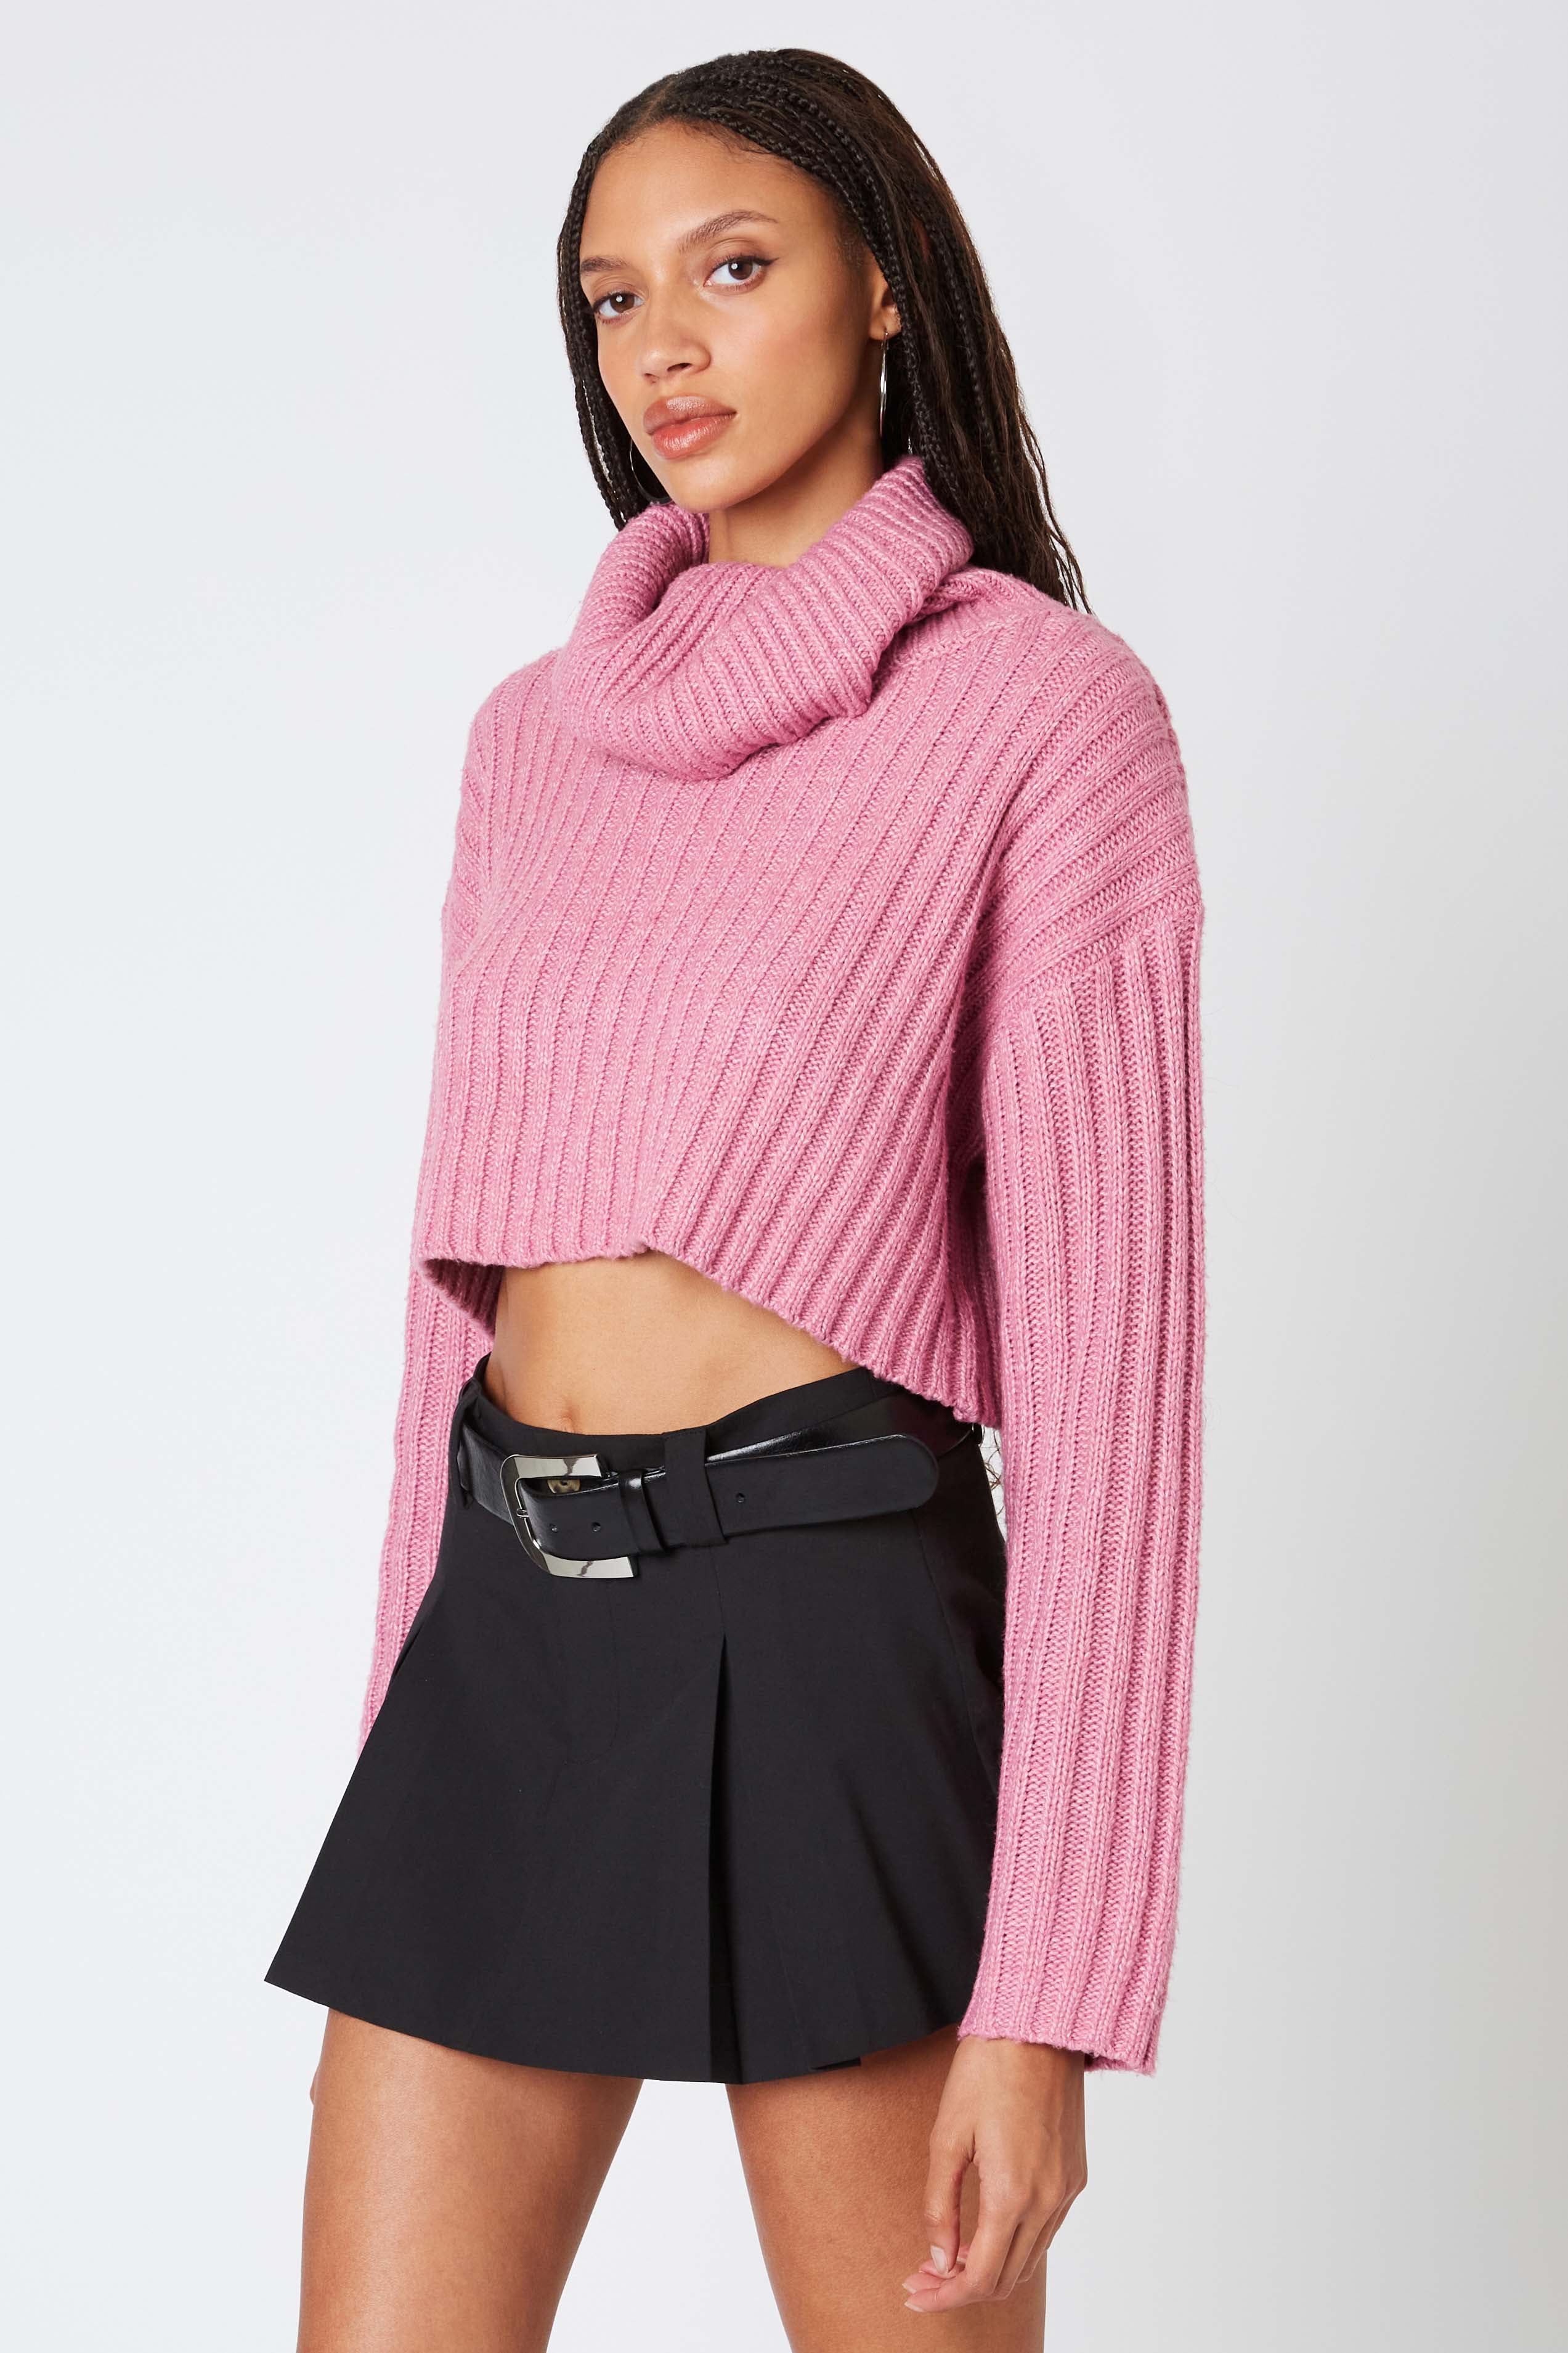 Cropped Turtleneck Sweater in Mauve Side View